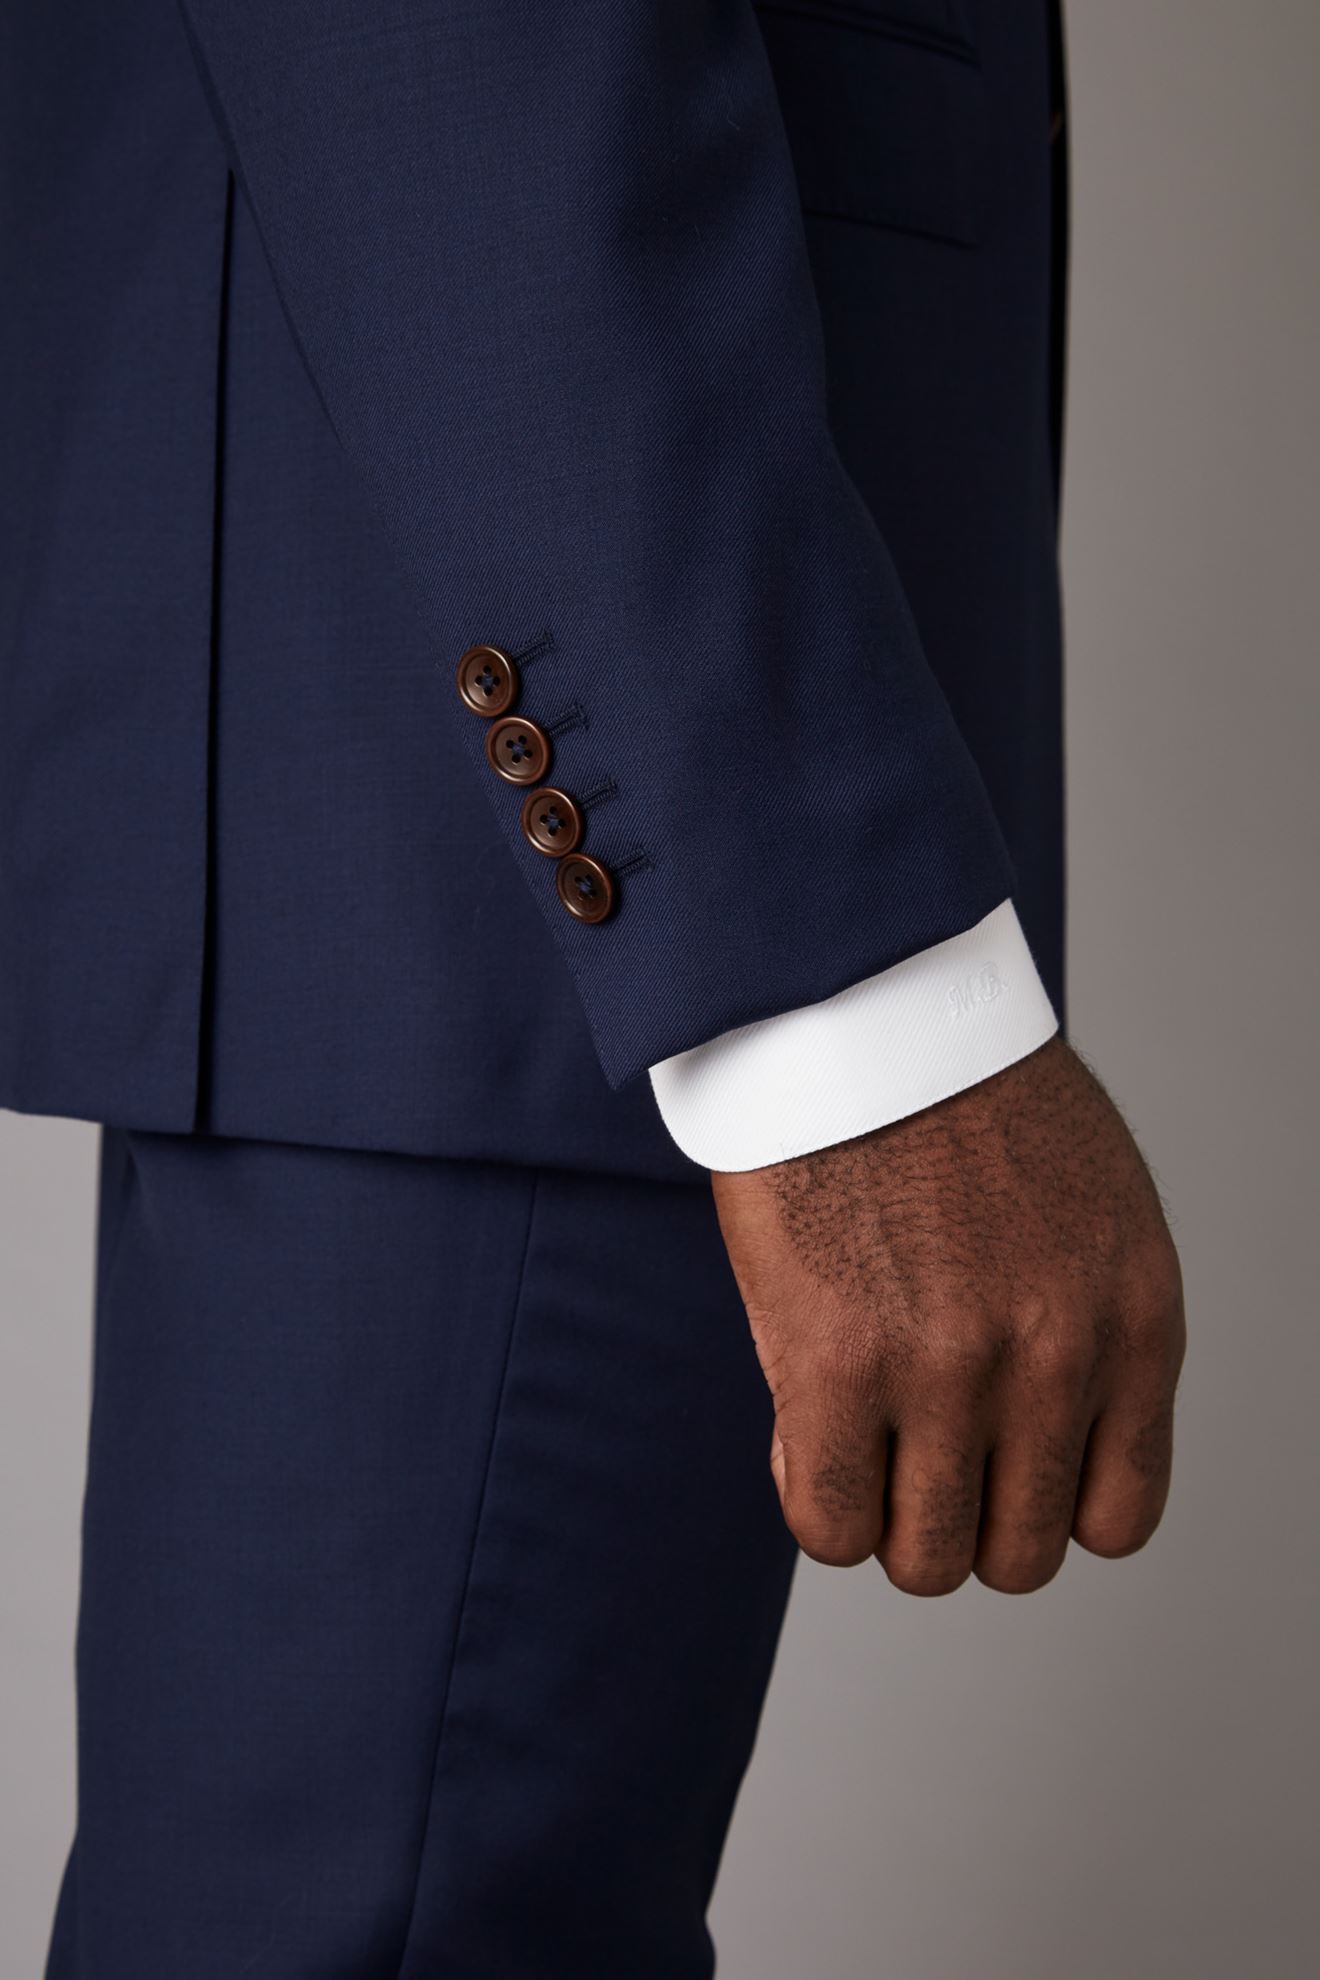 Picture of Navy blue two-piece suit